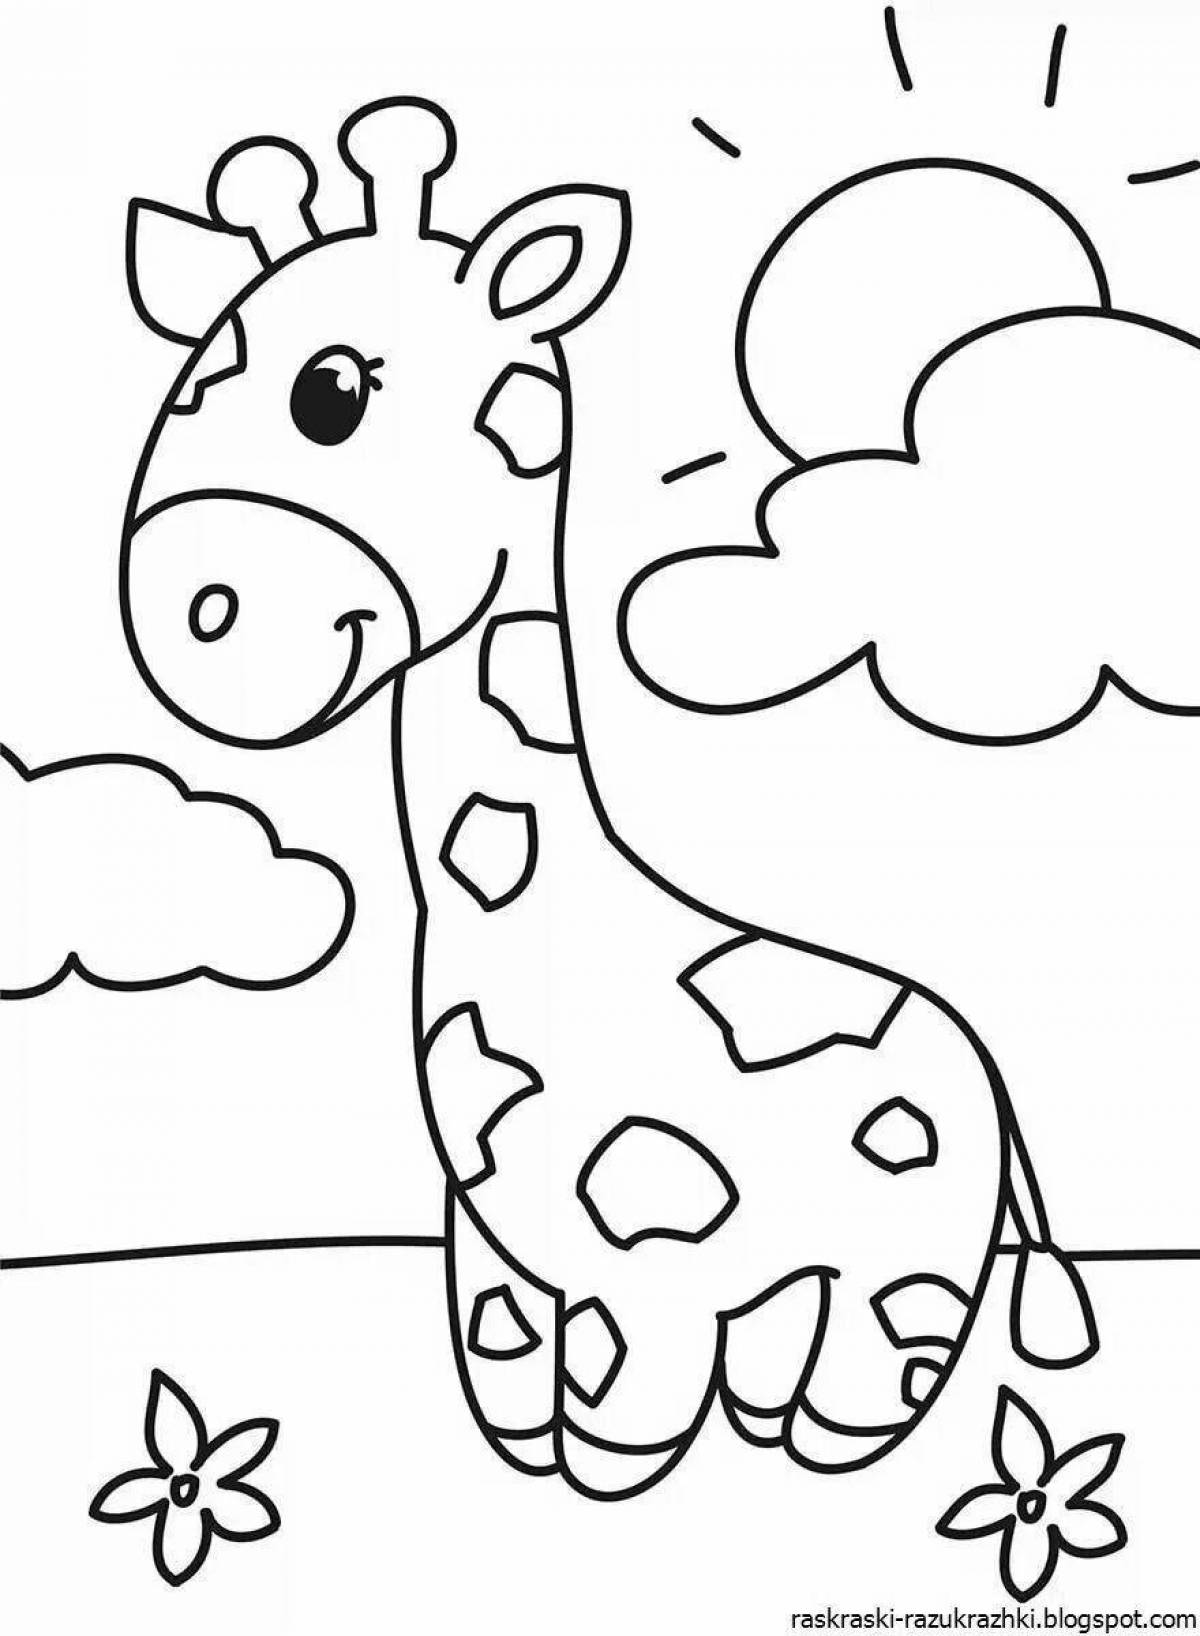 Fun coloring book for 4 year olds